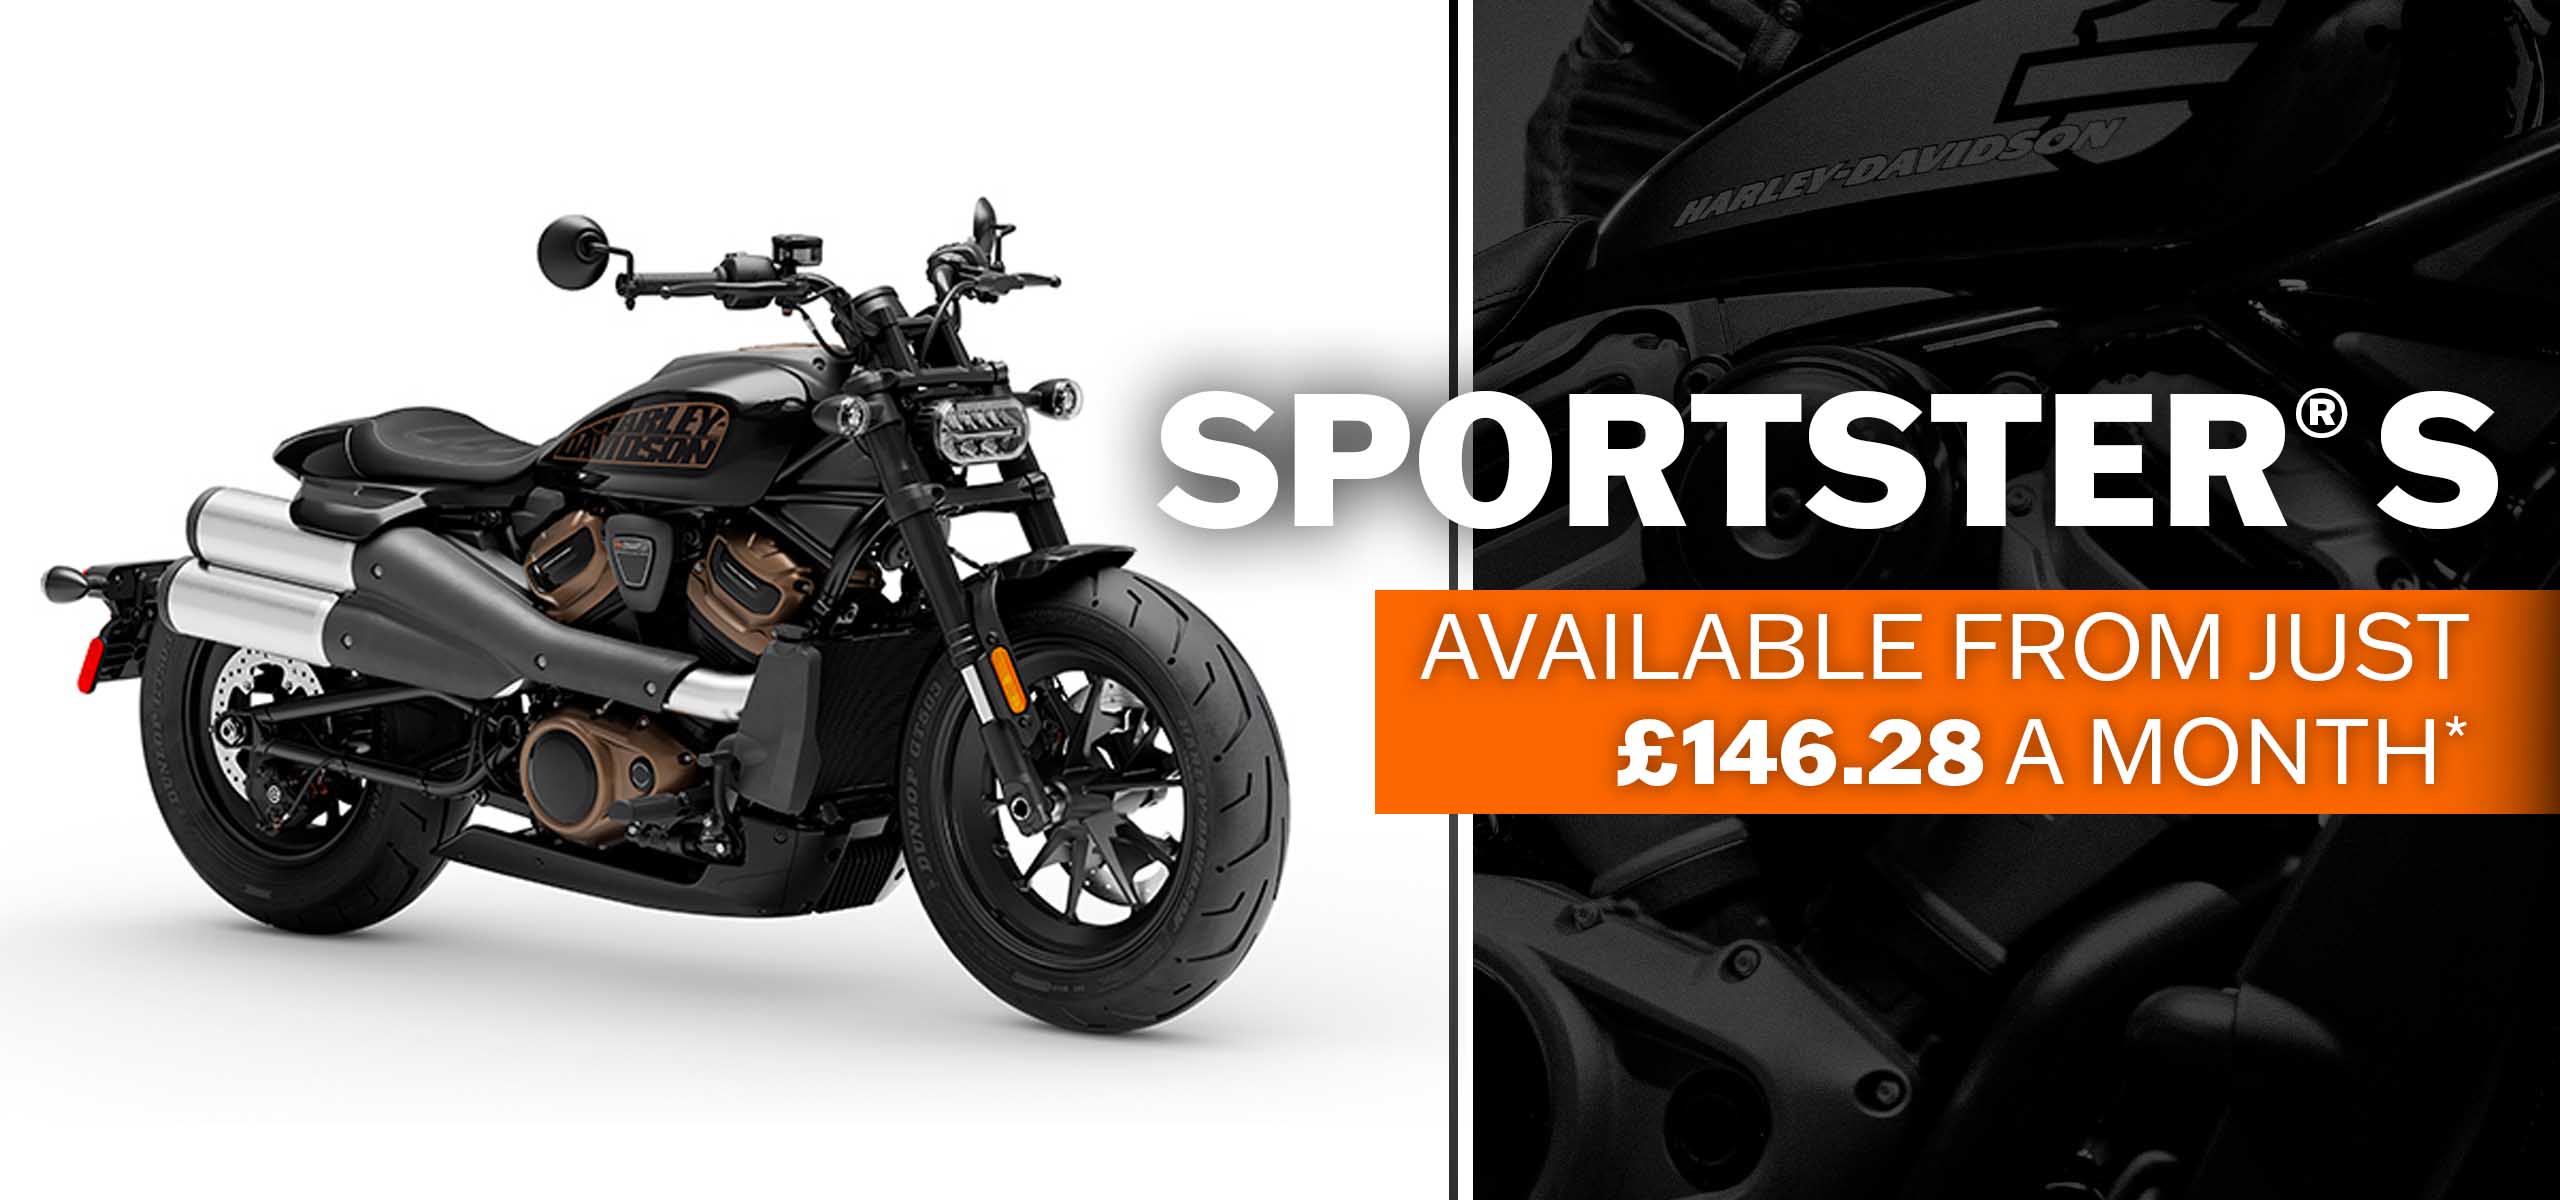 The Sportster S is available at Maidstone Harley-Davidson with monthly payments on H-D Finance